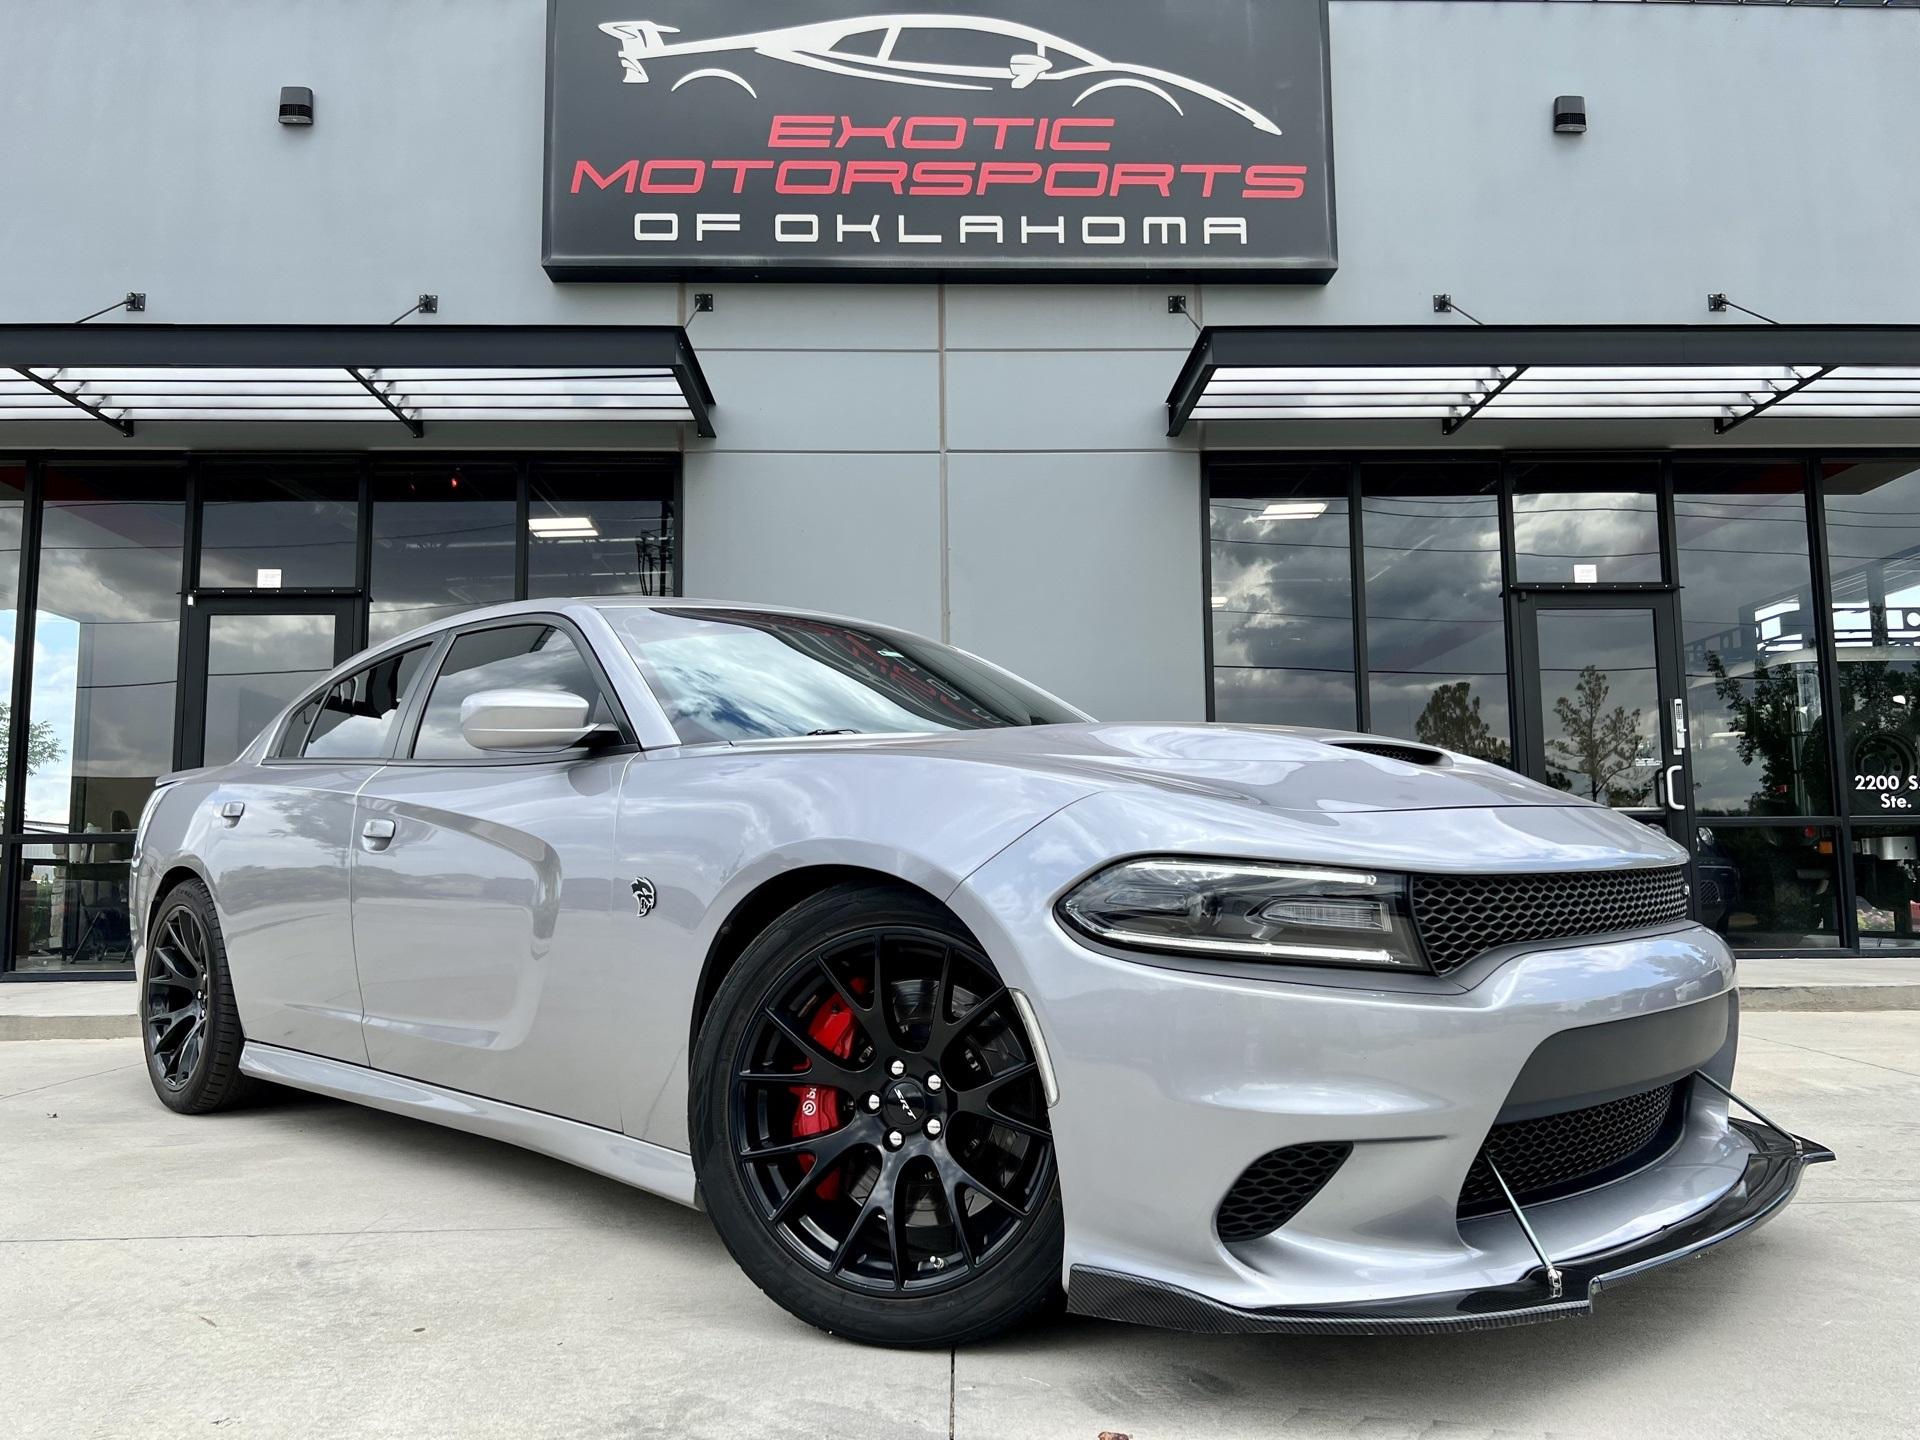 Used 2016 Dodge Charger SRT Hellcat For Sale (Sold) | Exotic Motorsports of  Oklahoma Stock #C873